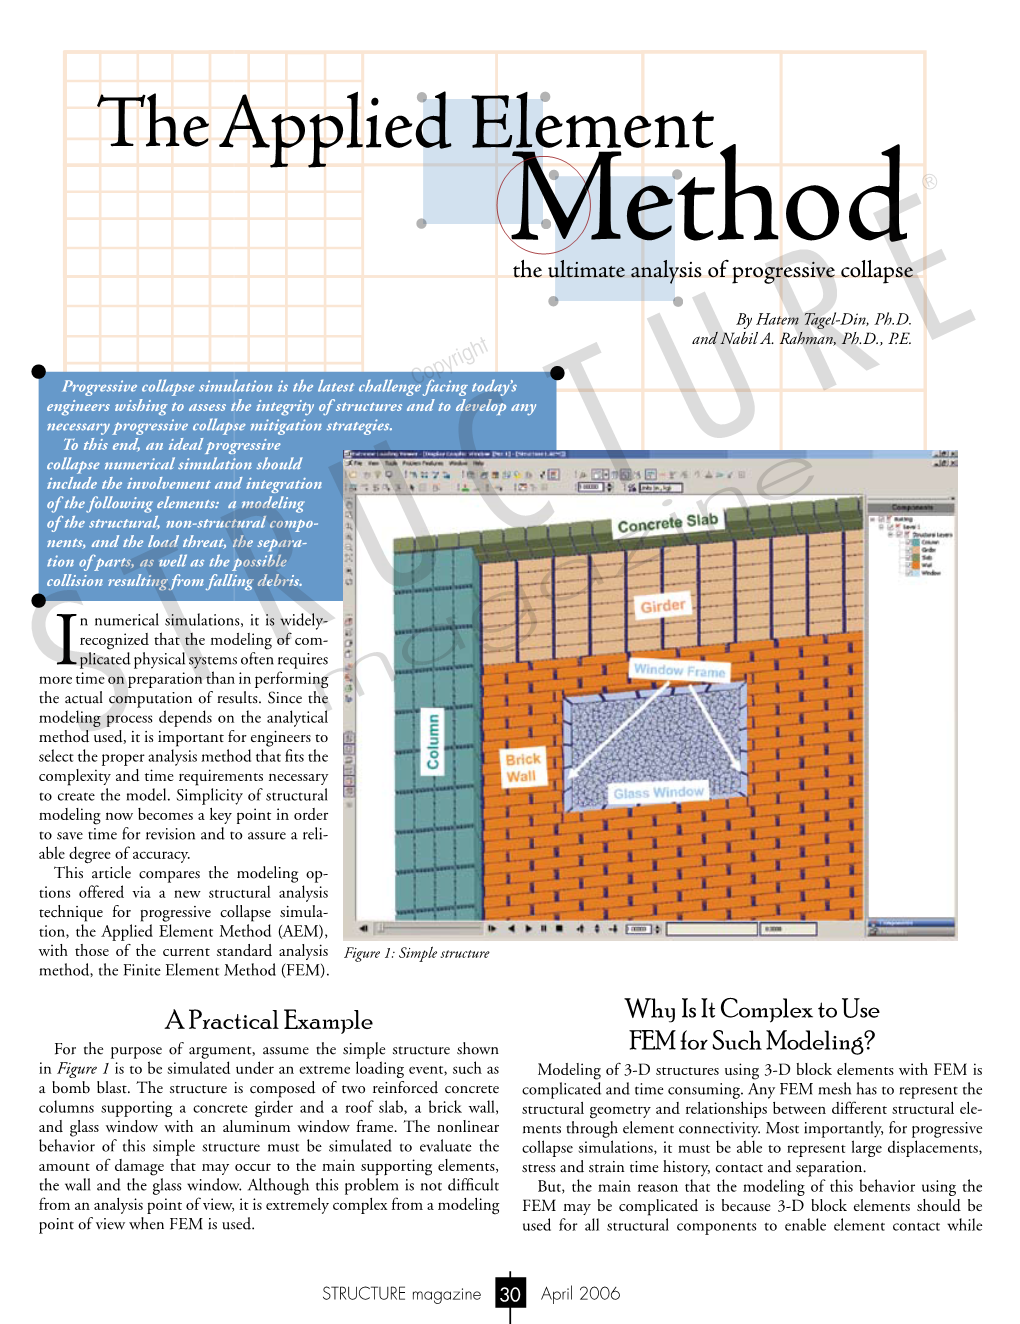 The Applied Element Method (AEM), with Those of the Current Standard Analysis Figure 1: Simple Structure Method, the Finite Element Method (FEM)